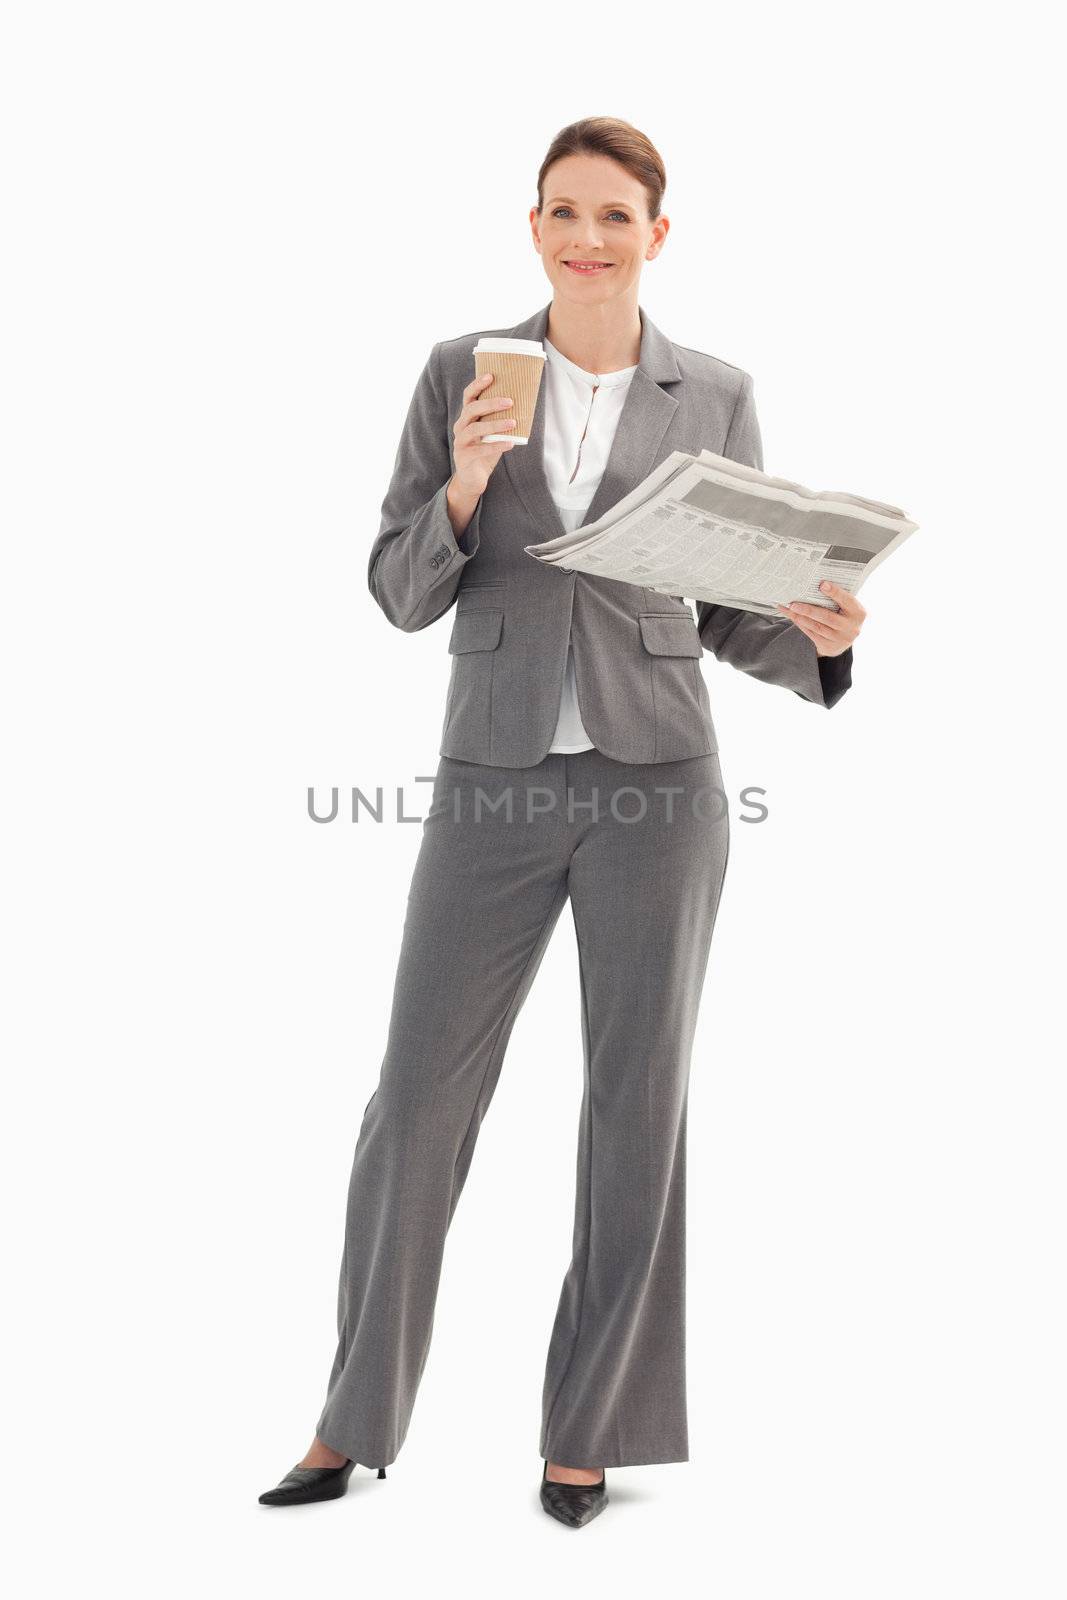 Smiling businesswoman holding cup and newspaper by Wavebreakmedia